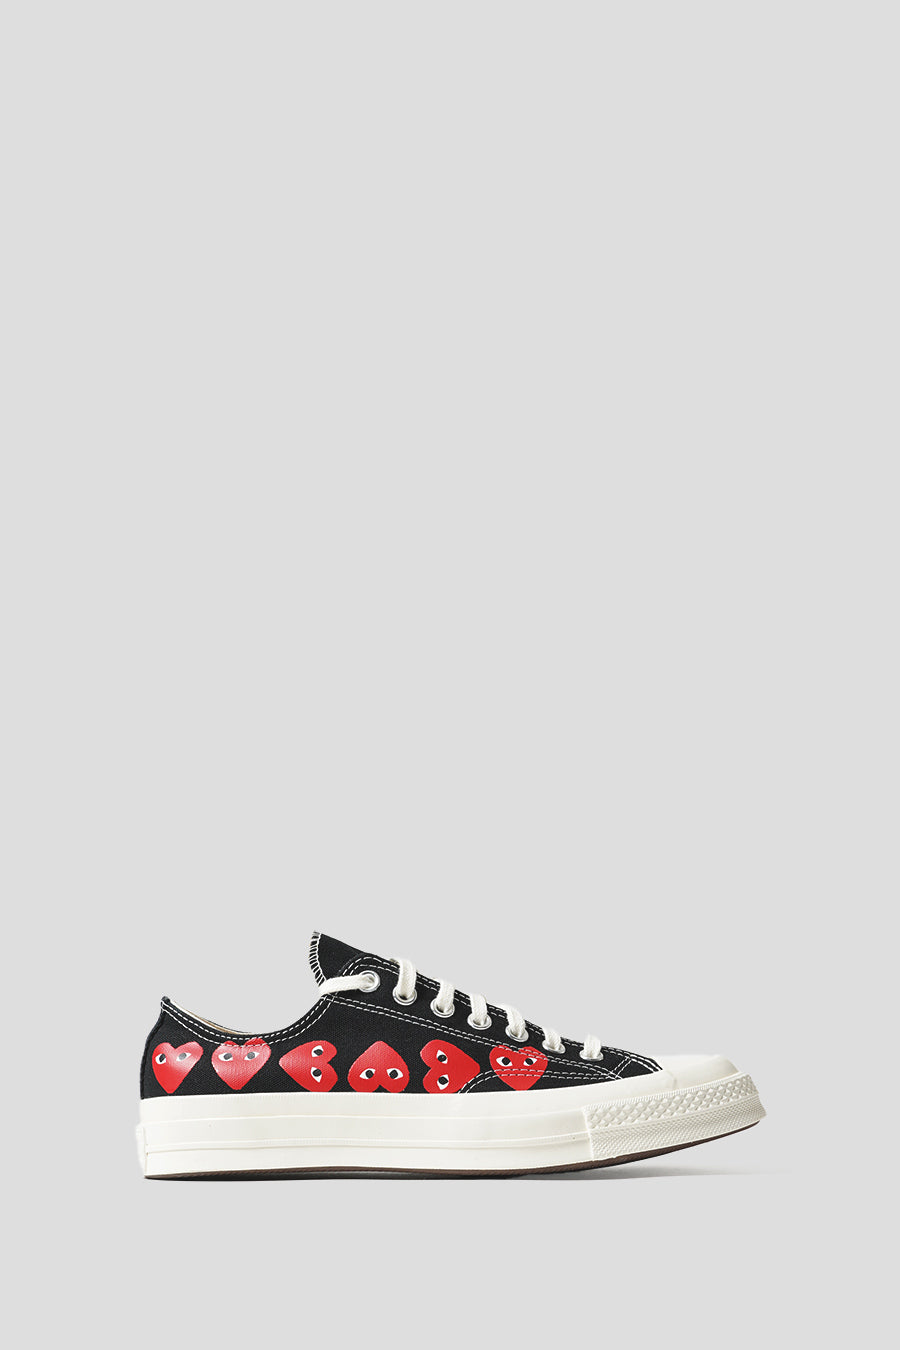 Comme des garçons PLAY - CT70 MULTI HEART BLACK, HIGHRISK RED AND EGRET LOW SNEAKERS - LE LABO STORE